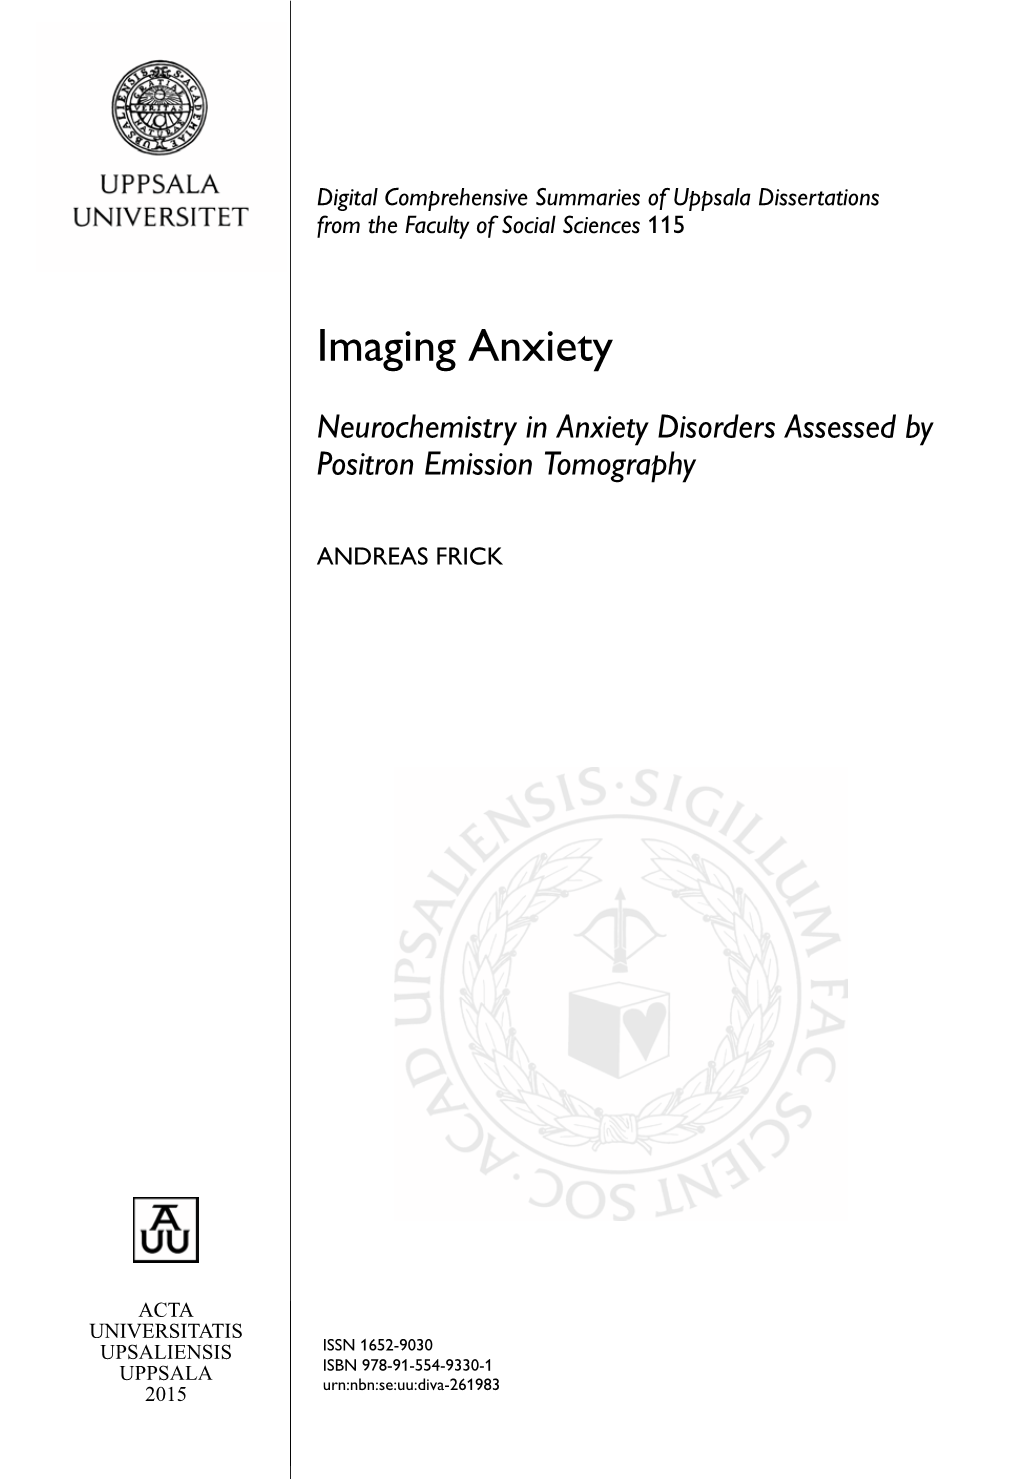 Imaging Anxiety